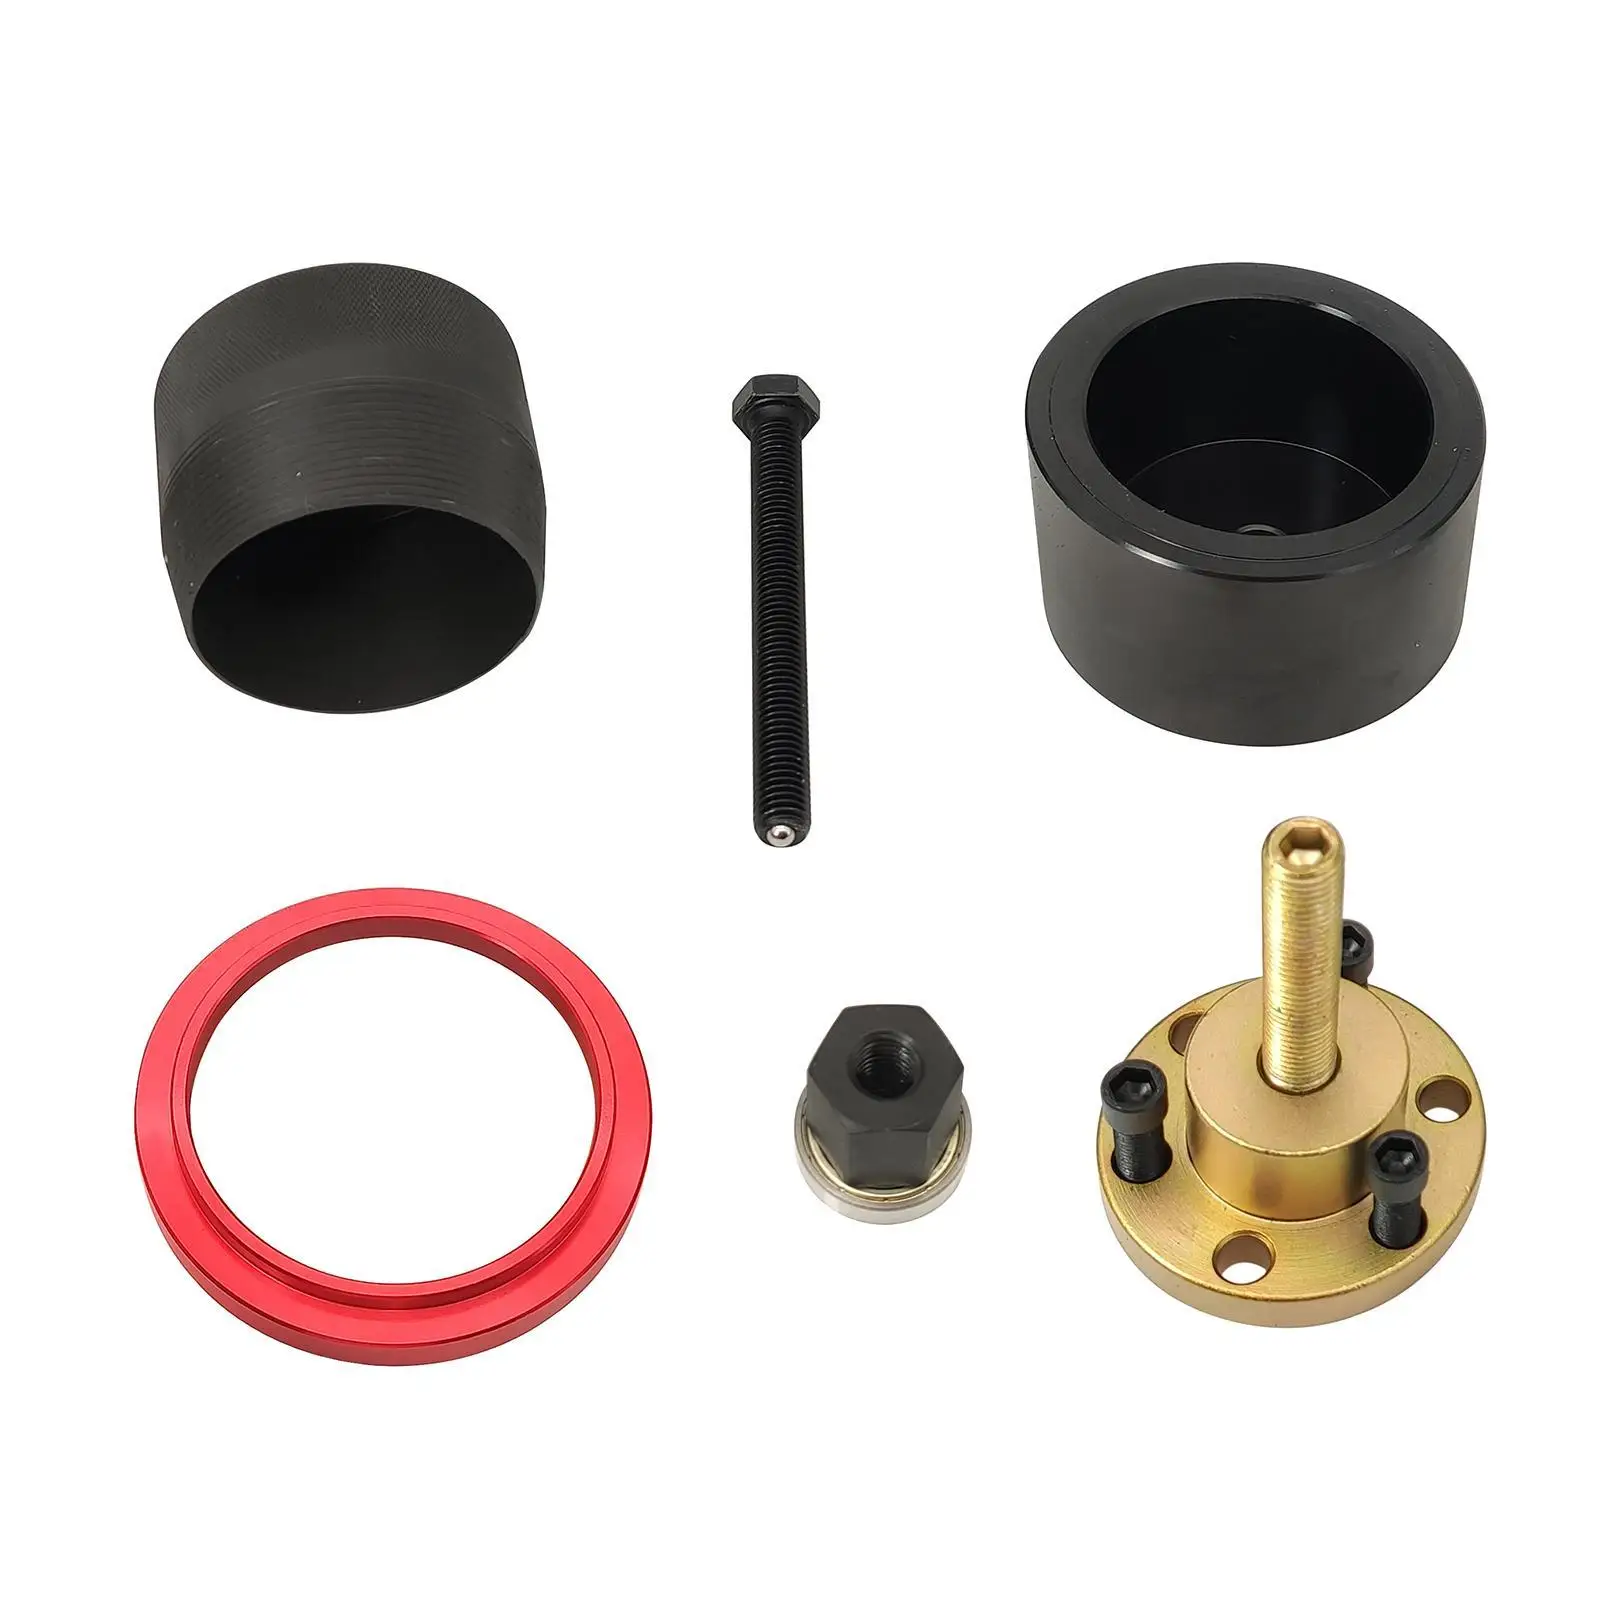 Car Oil Seal Remover and Installer Fit for N20 N26 Engines